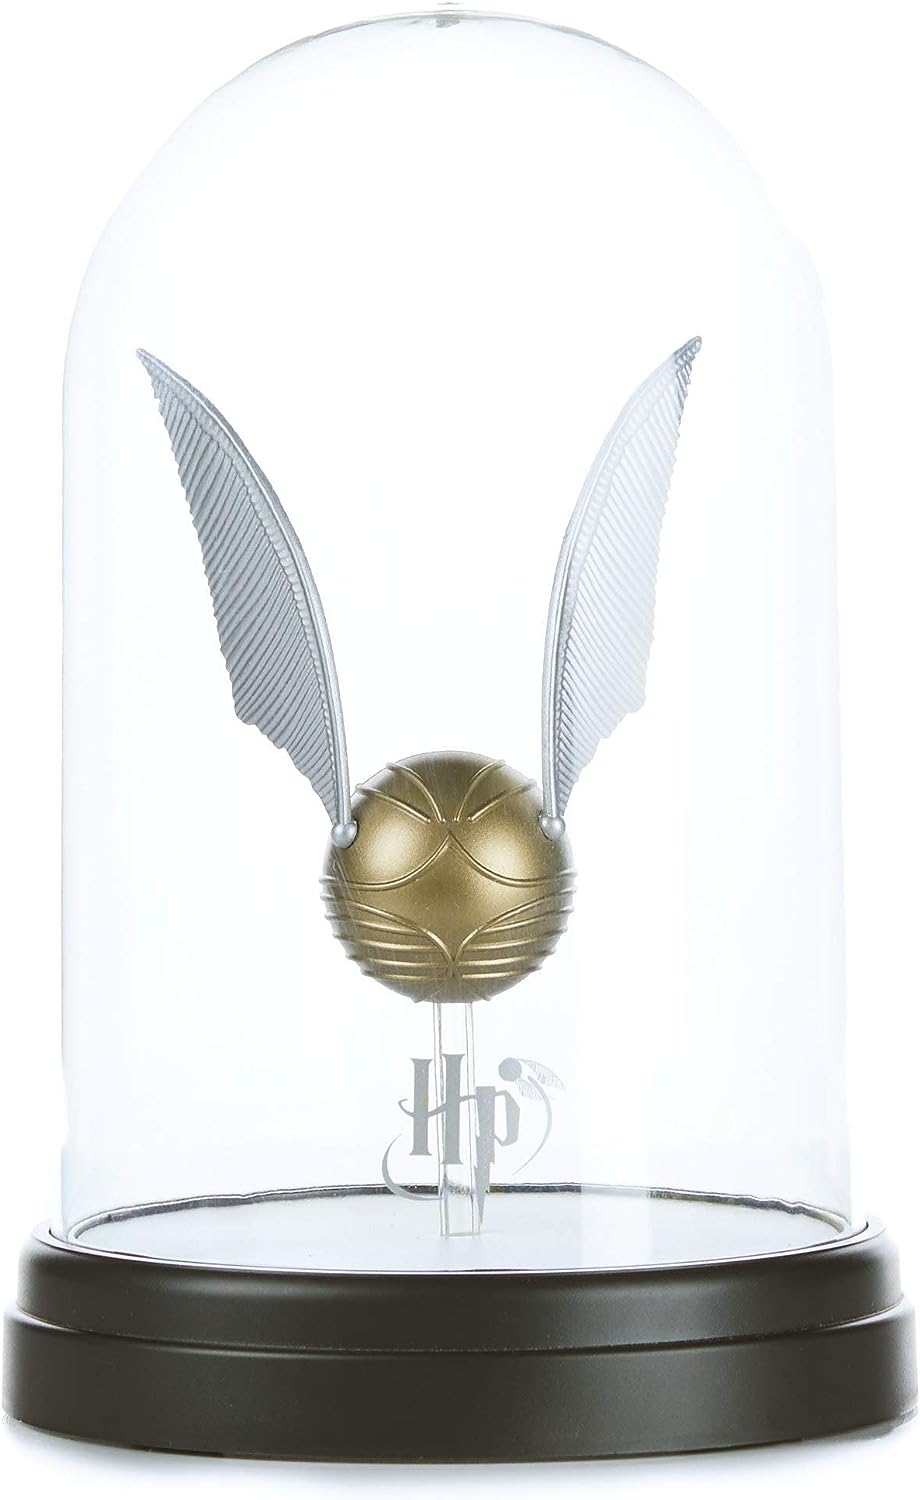 Paladone Harry Potter Golden Snitch Light - USB Powered Desk Lamp - Officially Licensed Merchandise